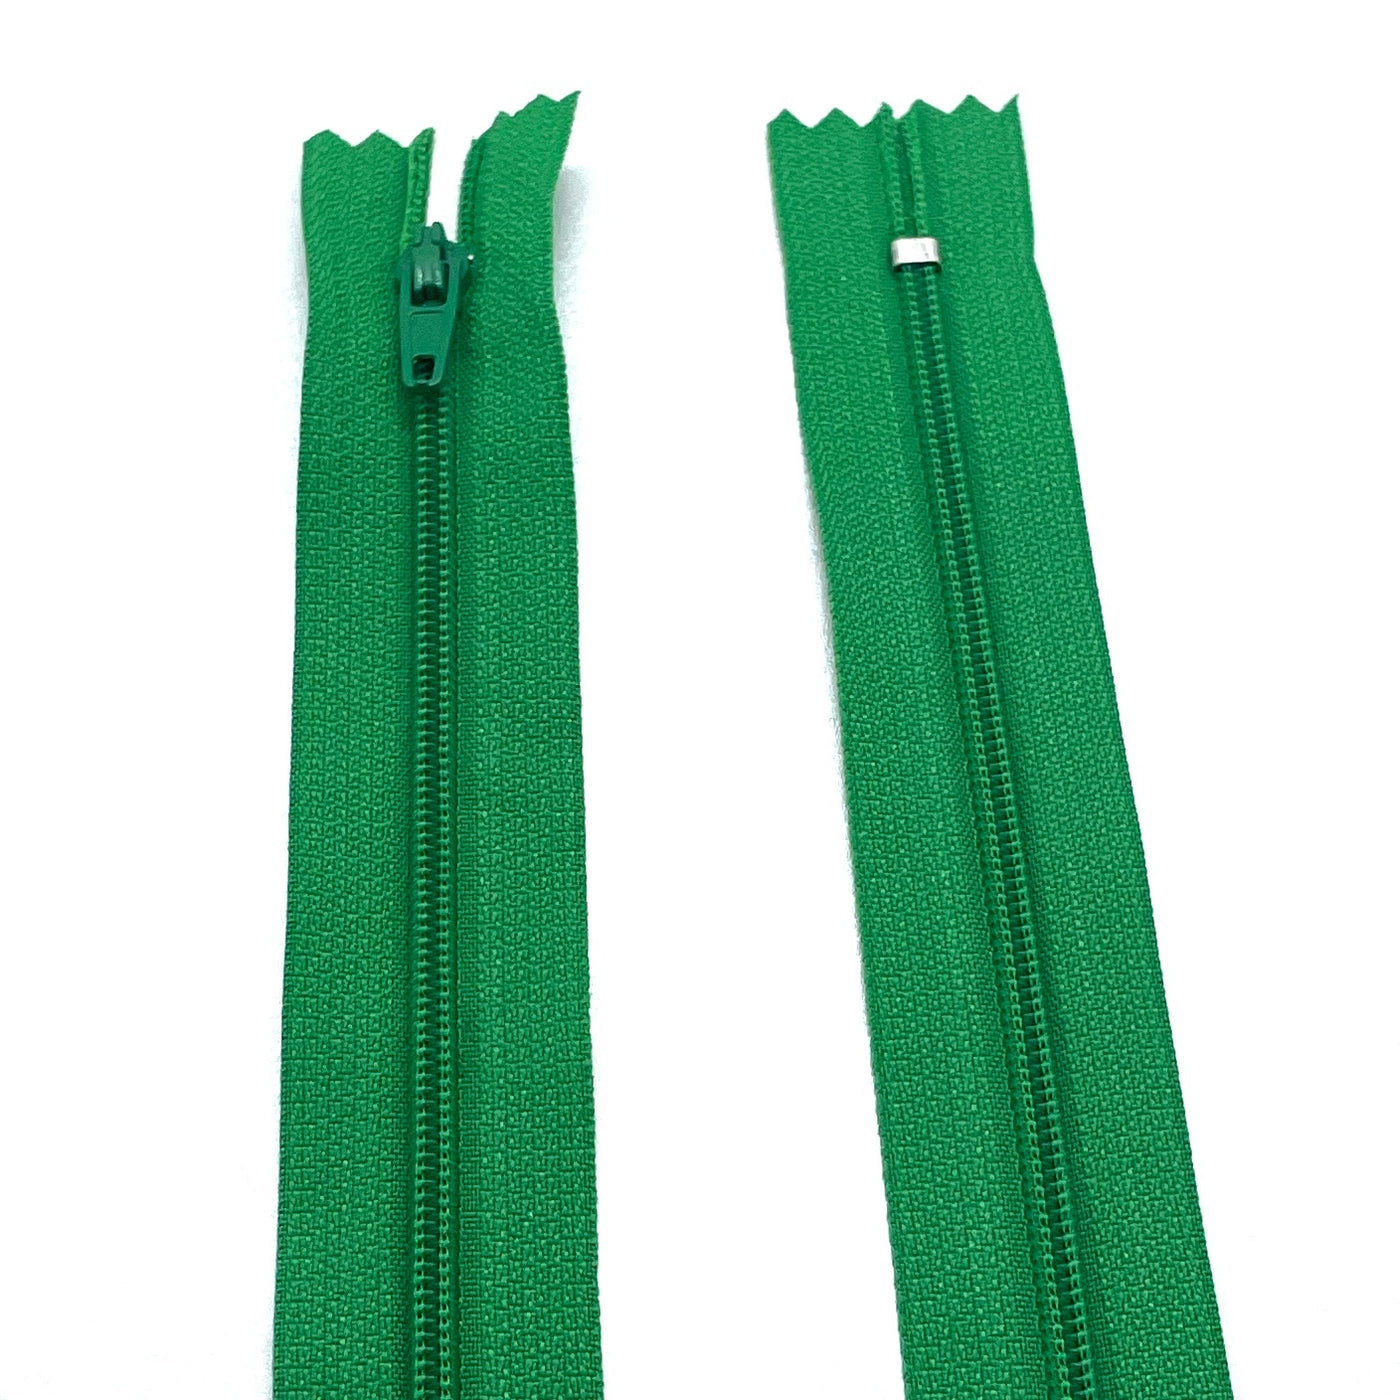 Photo of green nylon zips available in 25 colors and 5 sizes. Excellent quality zippers for craft and dressmaking purposes. Perfect for dresses, skirts, trousers, bags, purses, cushions, and numerous other projects. So many possibilities, so little time!